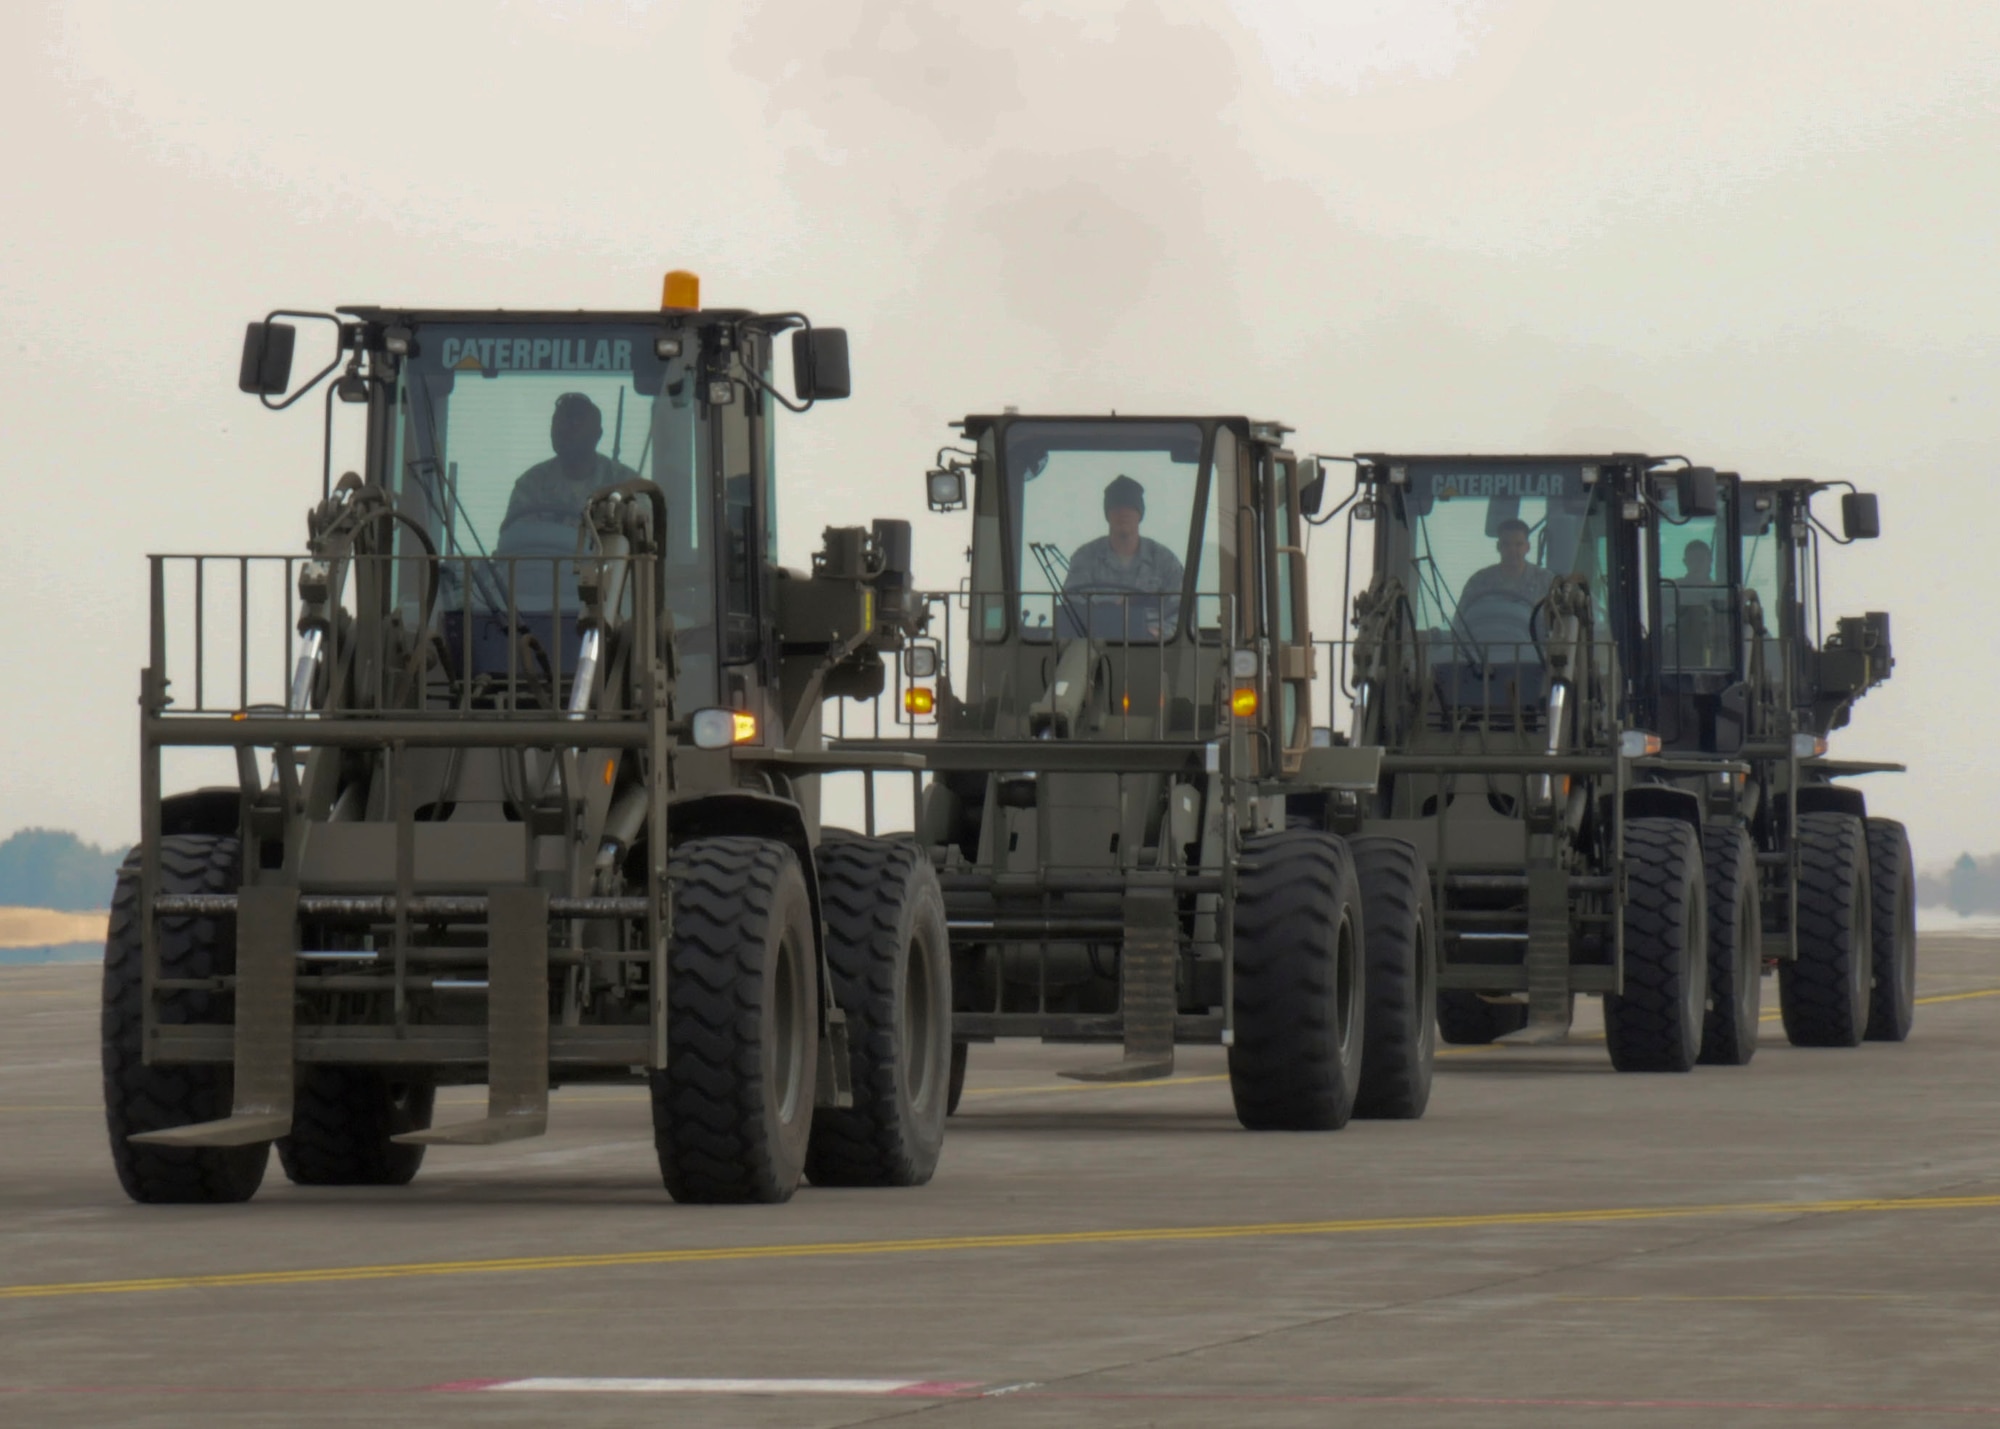 Forklifts line the flightline here waiting to offload cargo March 30. Since Operation Tomodachi kicked-off, Misawa Air Base has received more than a million pounds of cargo in support of earthquake and tsunami relief operations. (U.S. Air Force photo by Staff Sgt. Rachel Martinez/Released) 